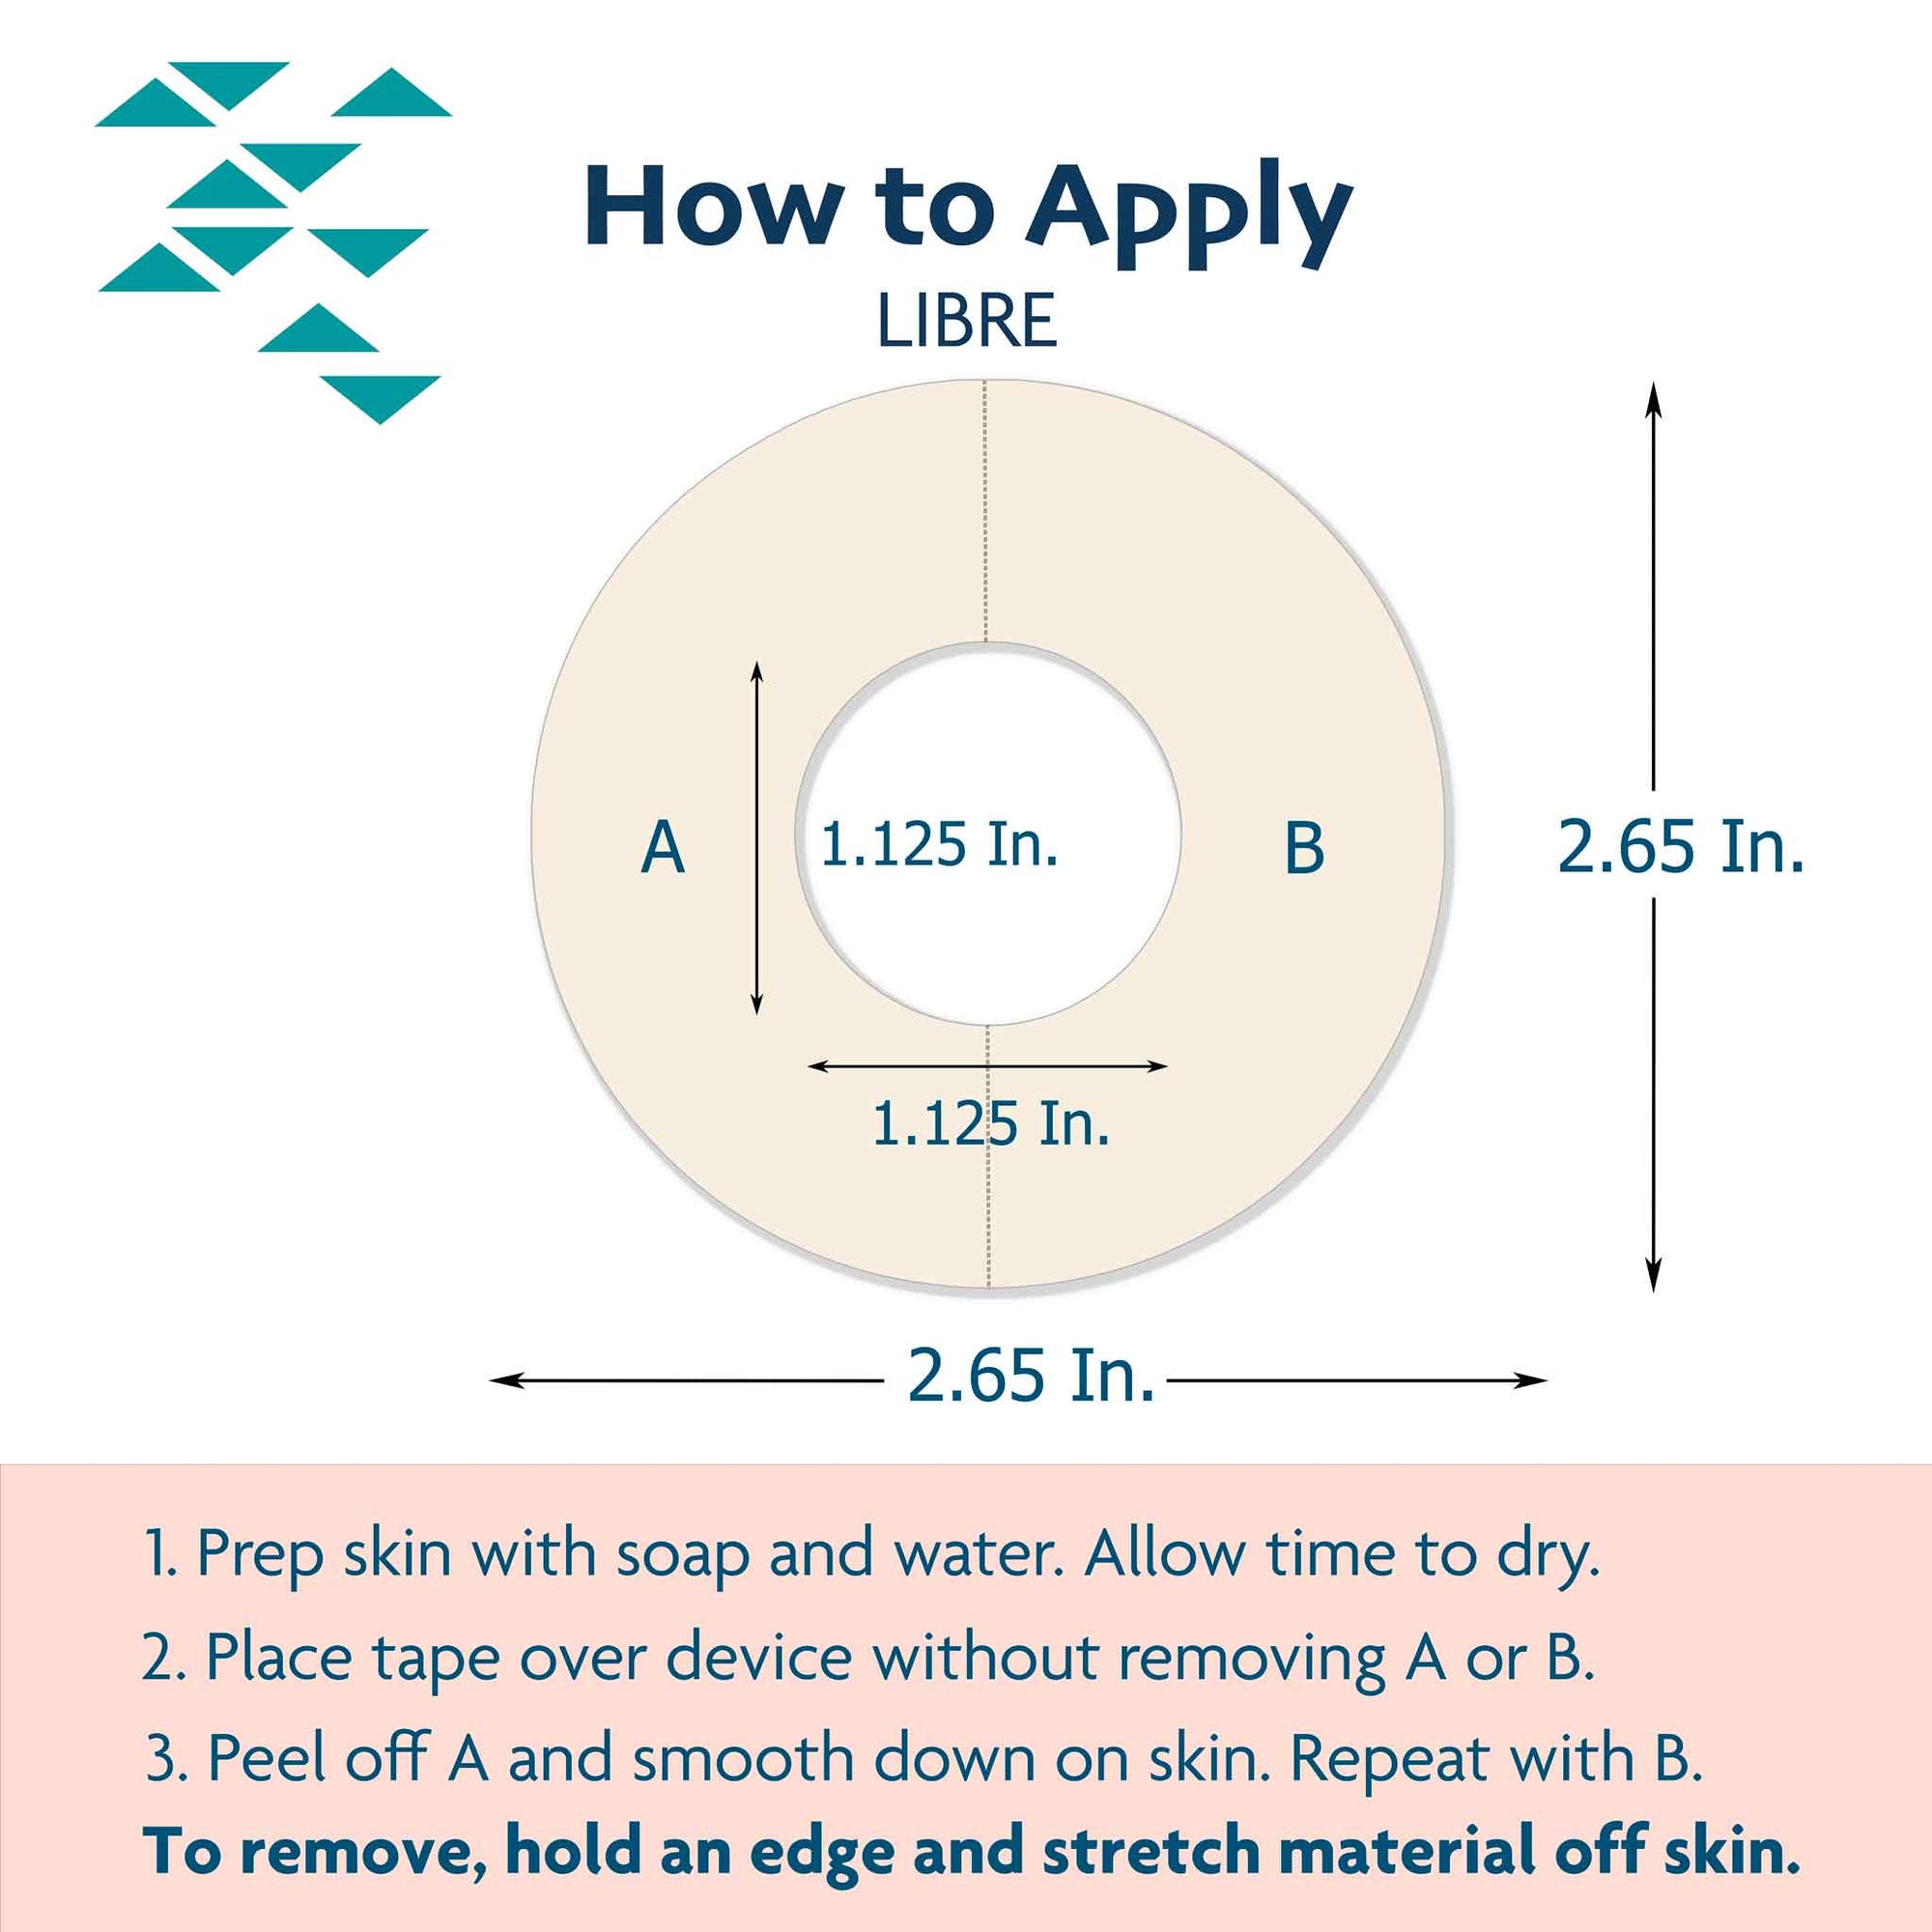 Instructions to properly use libre adhesive patch to secure CGM system, Abbott Lingo